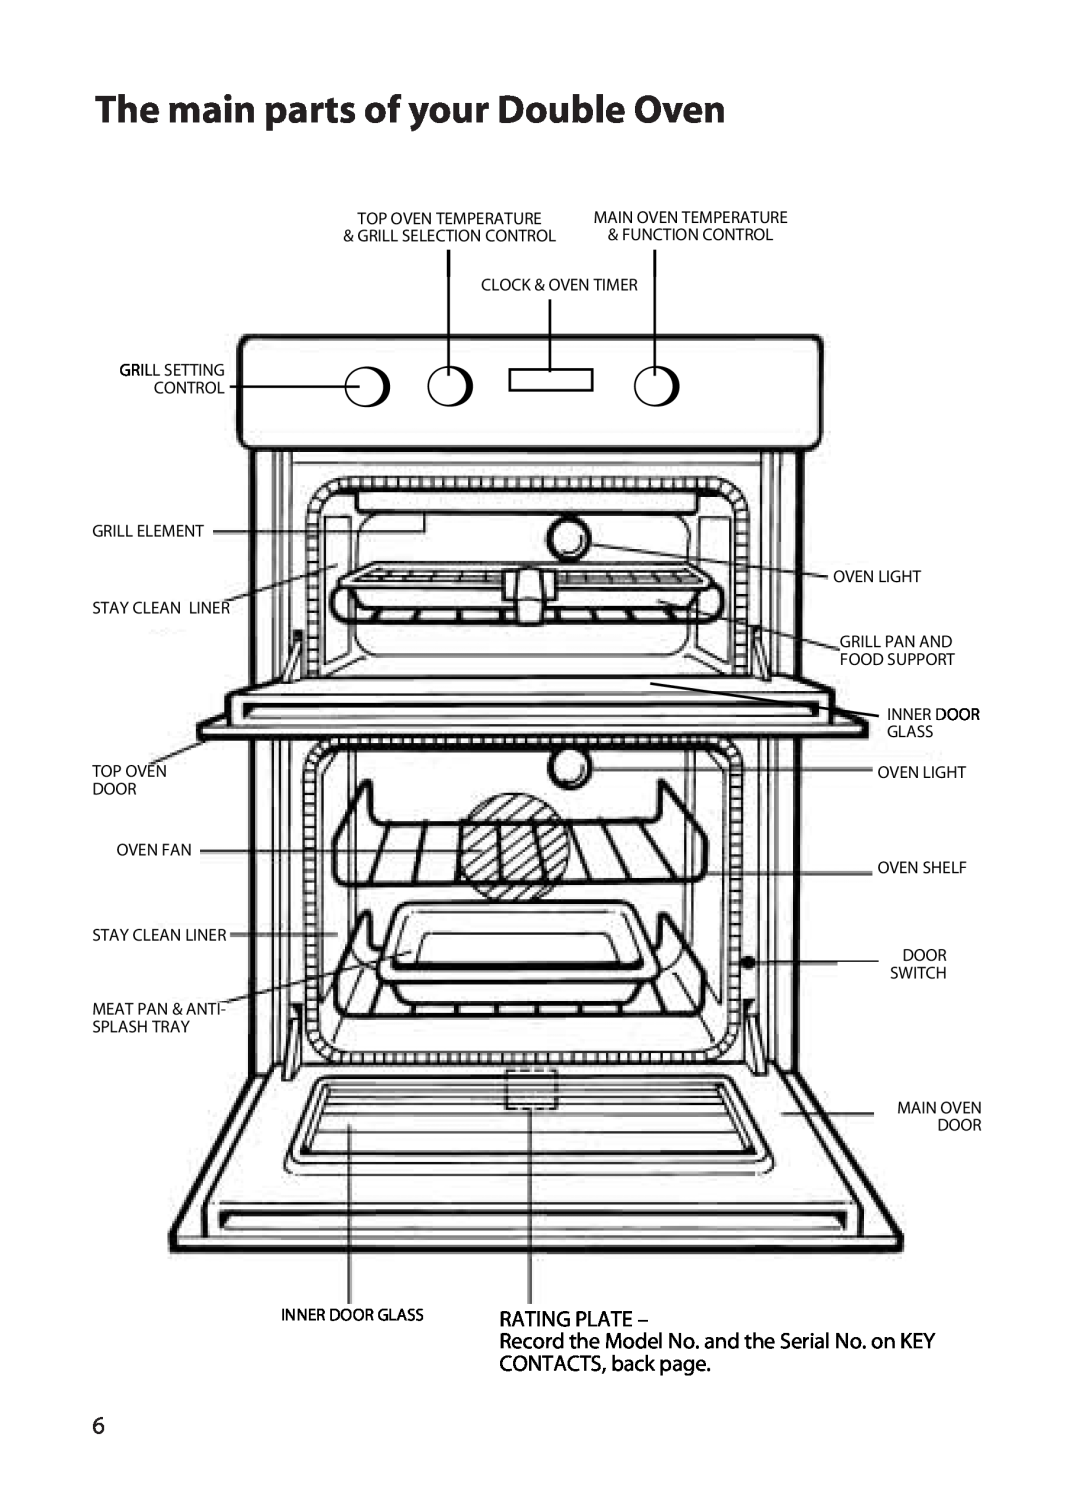 Hotpoint UT47 The main parts of your Double Oven, Top Oven Temperature, Main Oven Temperature, Grill Selection Control 